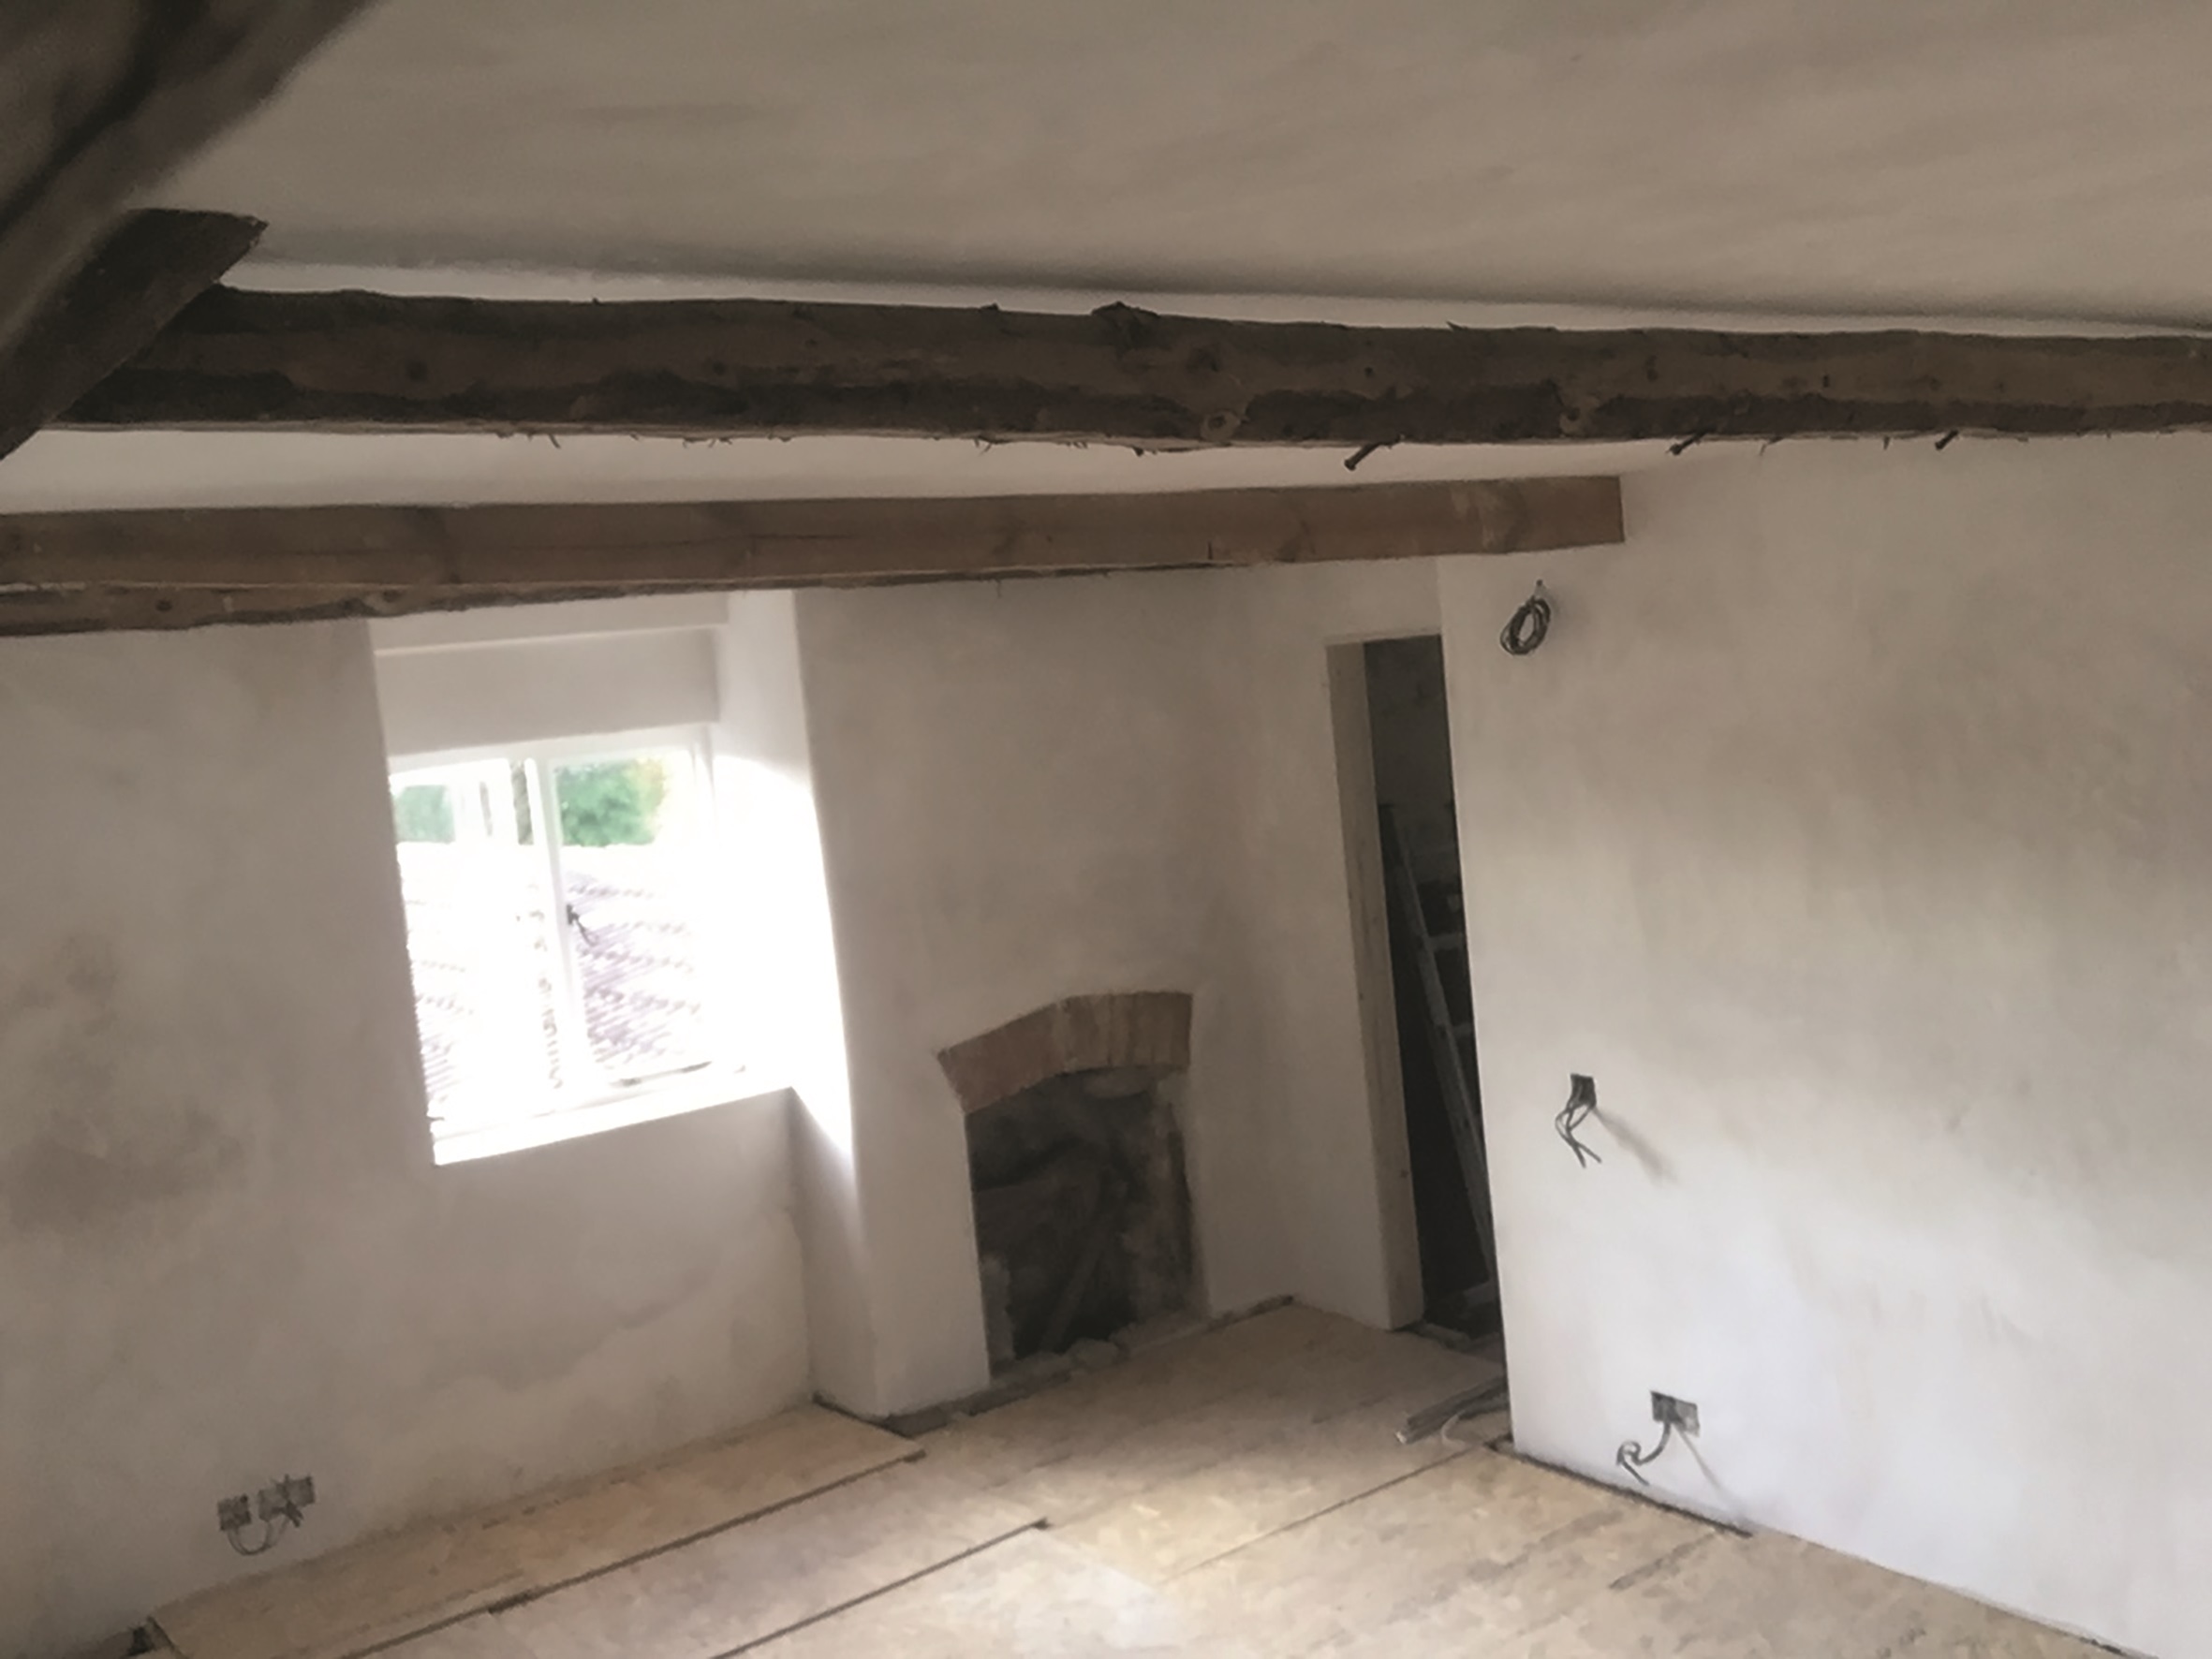 He has patched, repaired and blended lime plaster over the old walls and trowelled the new woodwool partitions and ceiling with lime finishing plaster. The result has exceeded all our expectations (his too!) giving us a stable, integrated finish that still has all the appealing irregularity of the historic plasterwork.